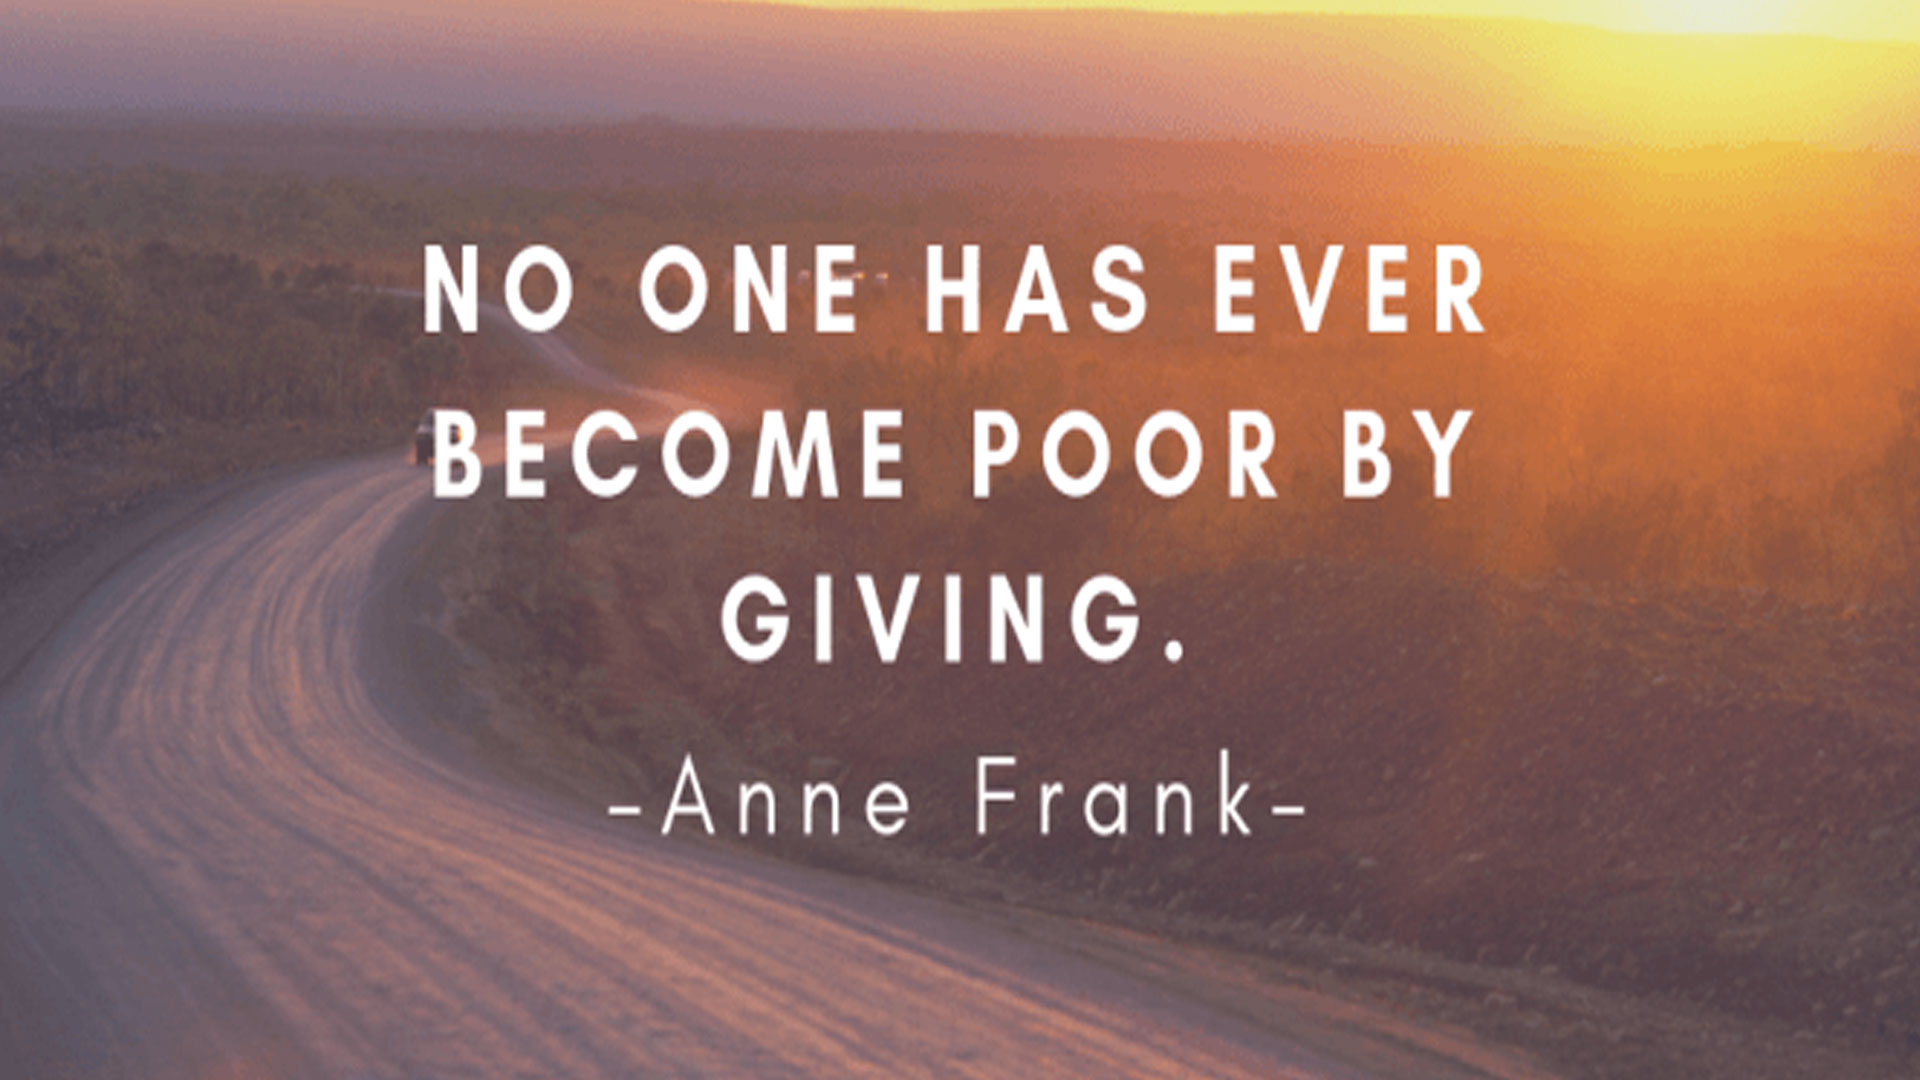 No one has ever become poor by giving